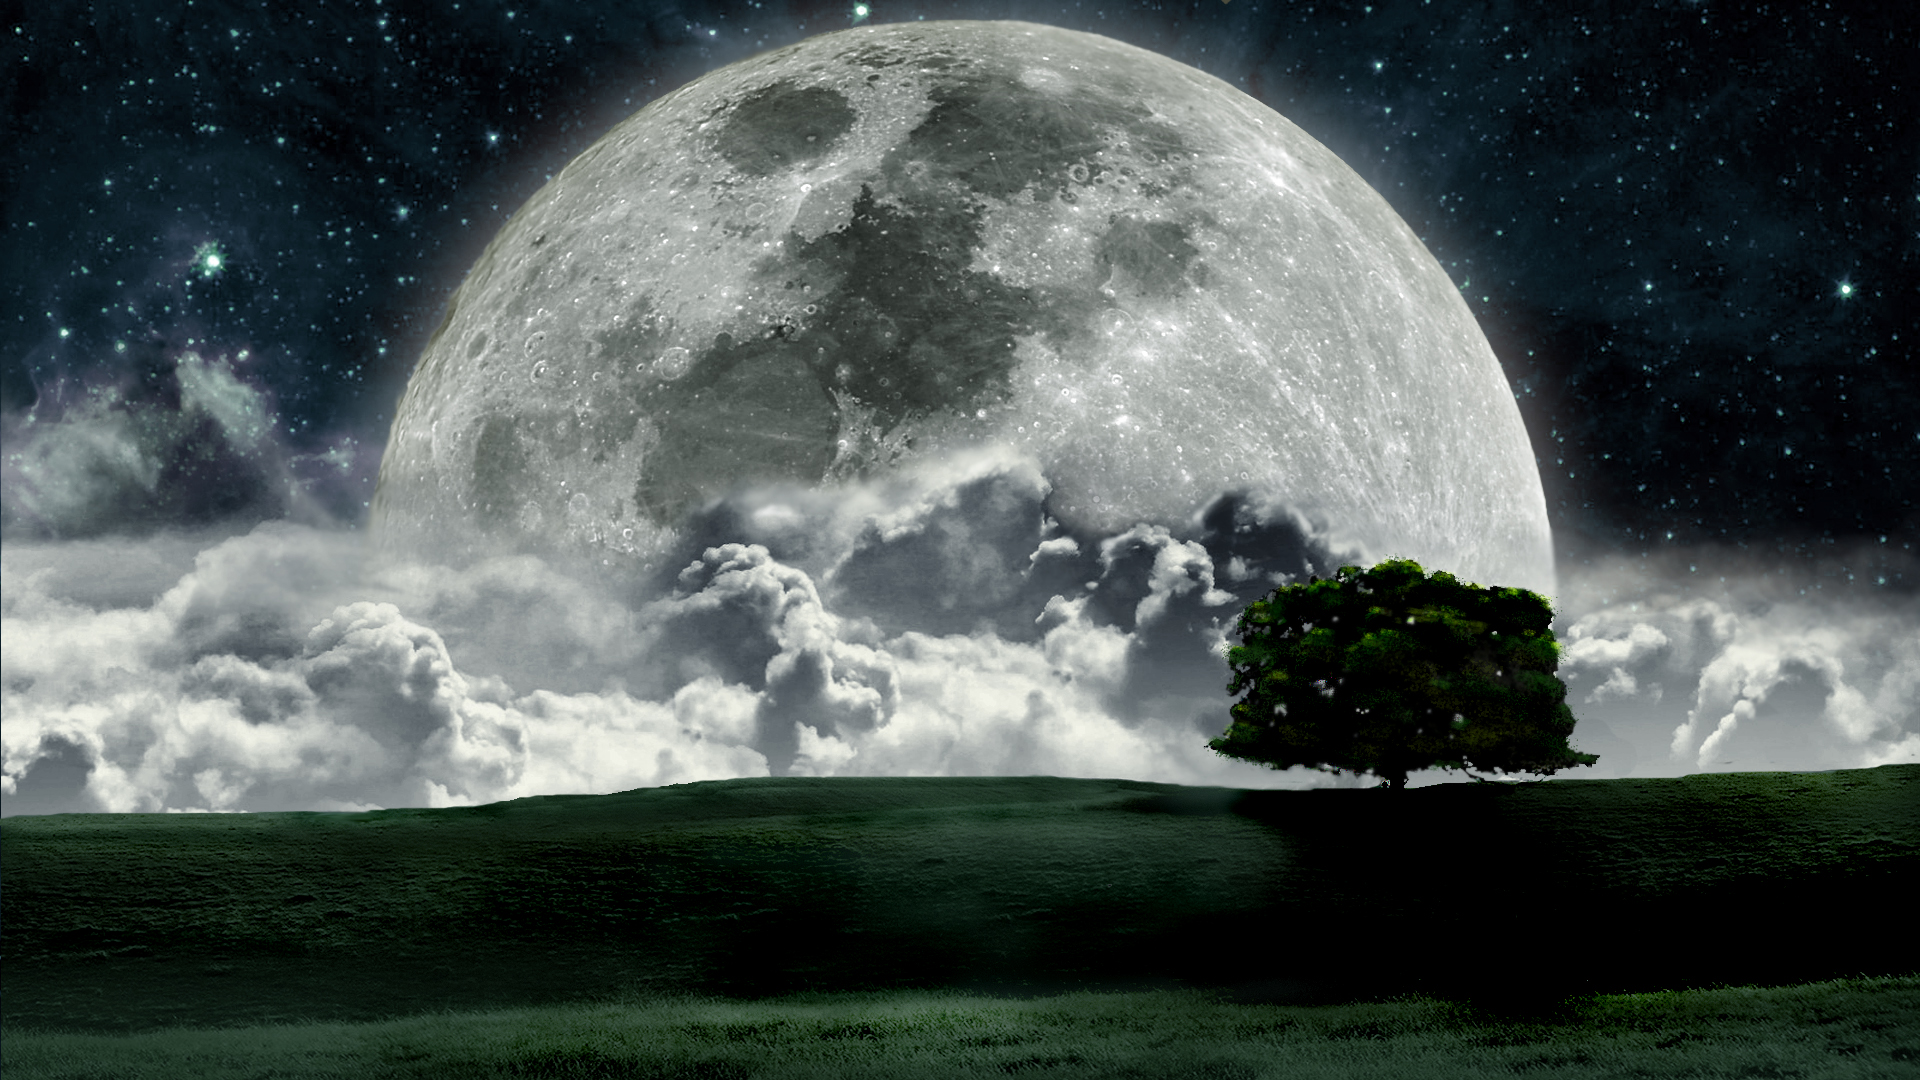 Scenery Moon View Wallpapers